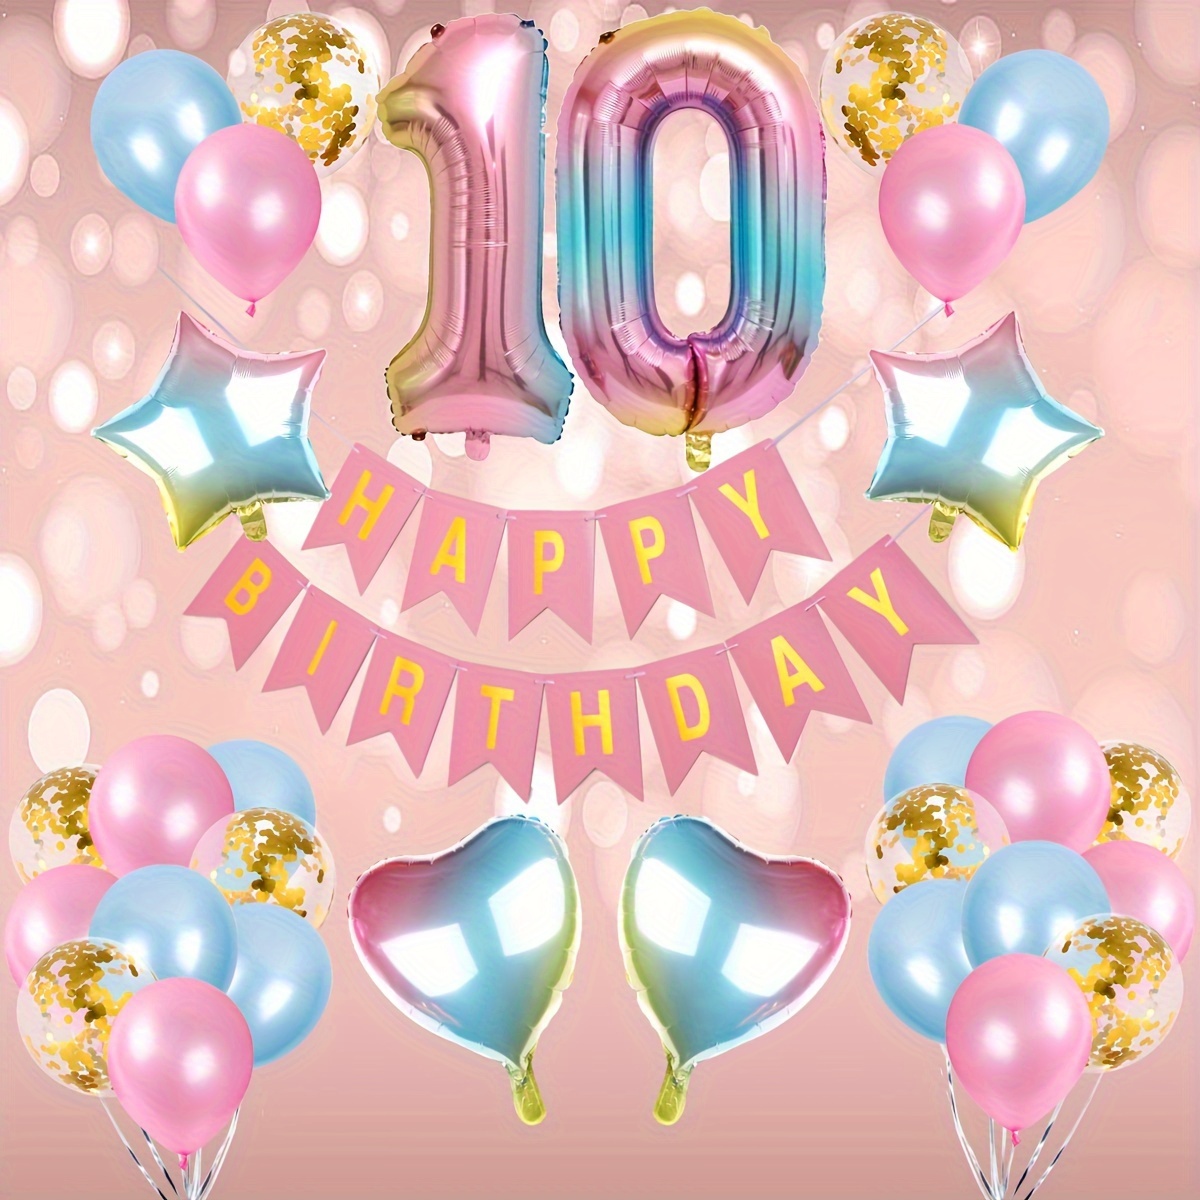 

44pcs 32inch Gradient Digital Aluminum Film Balloon Set With Banners, Birthday Party Decoration, 10th Birthday Decors